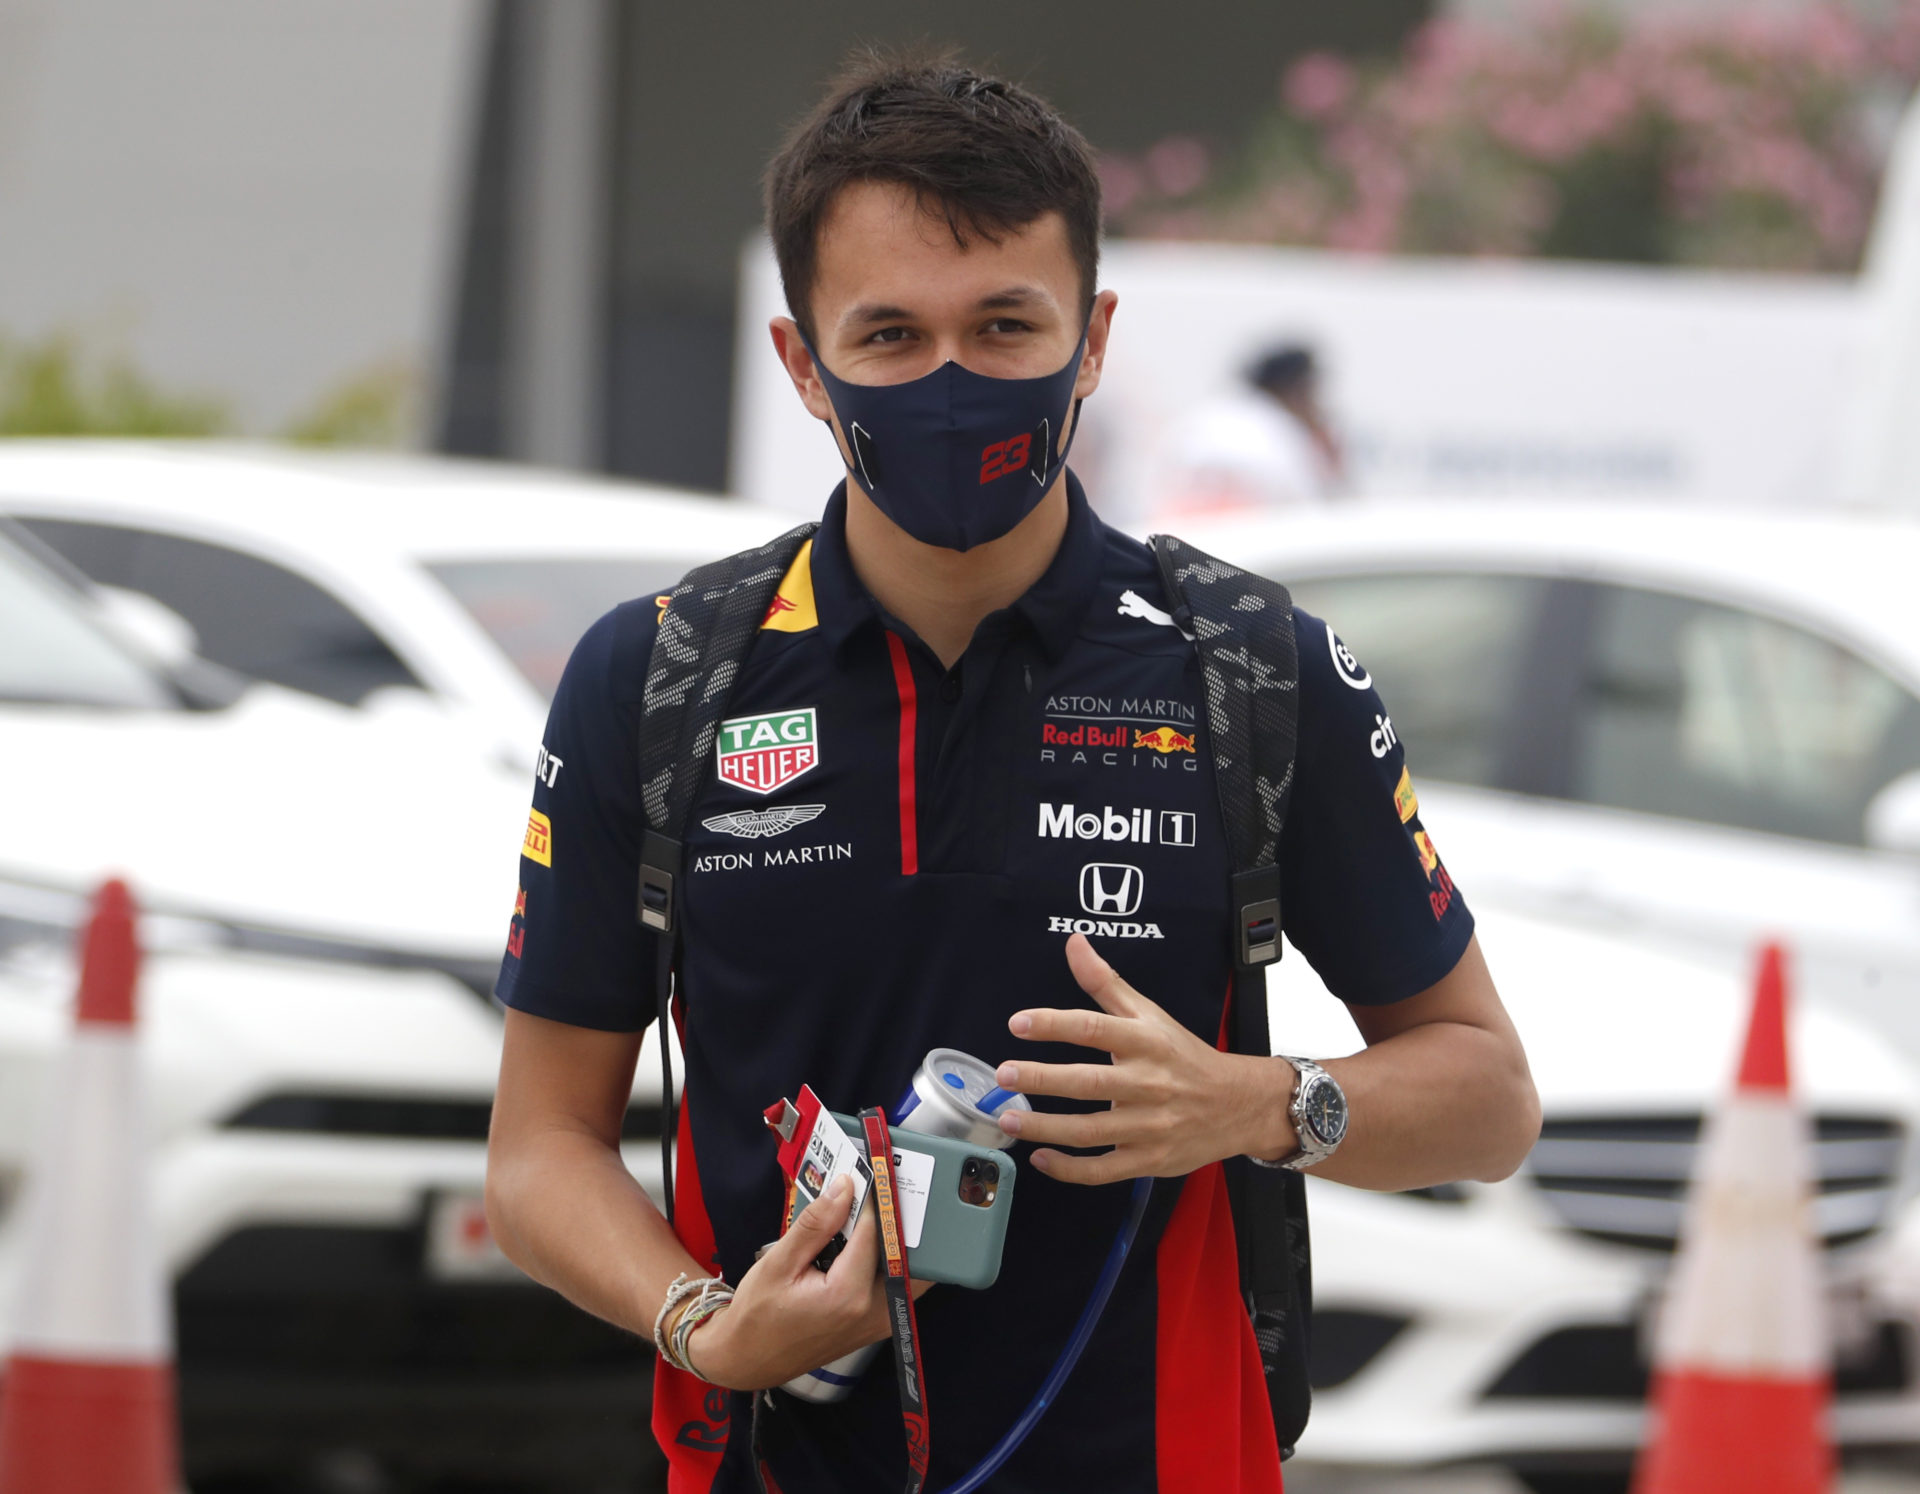 Albon leads in the 2020 penalty points table